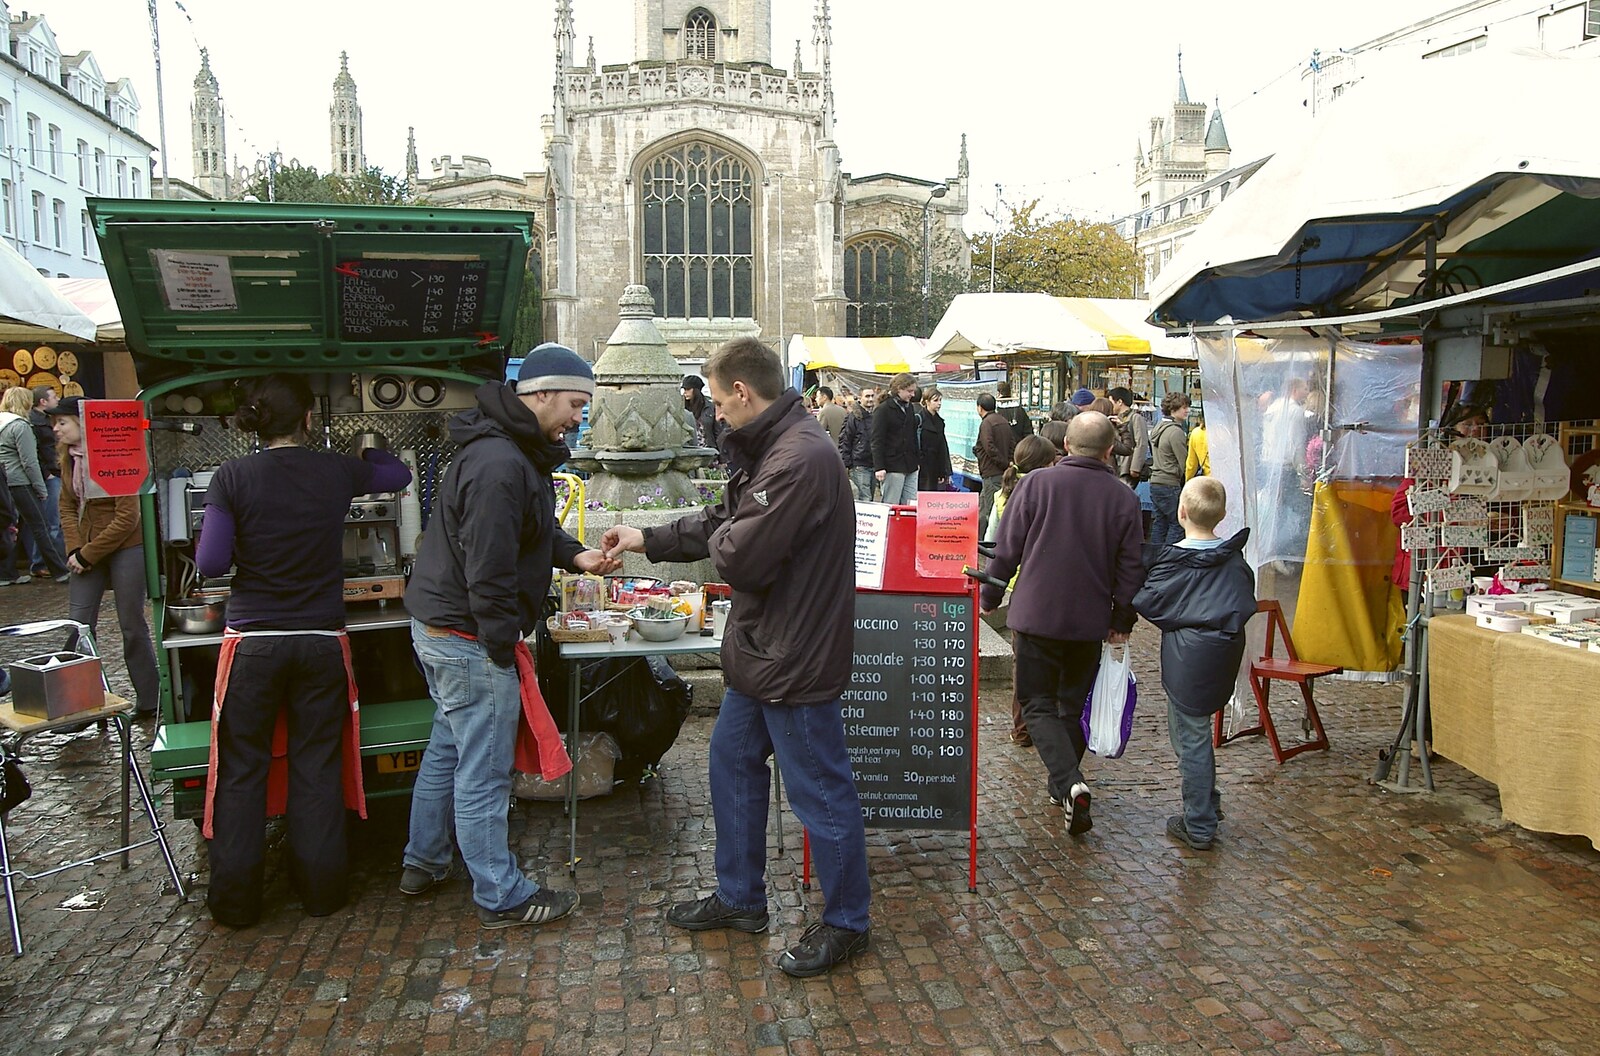 A pop-up coffee wagon from Autumn Colleges: a Wander around The Backs, Cambridge - 26th November